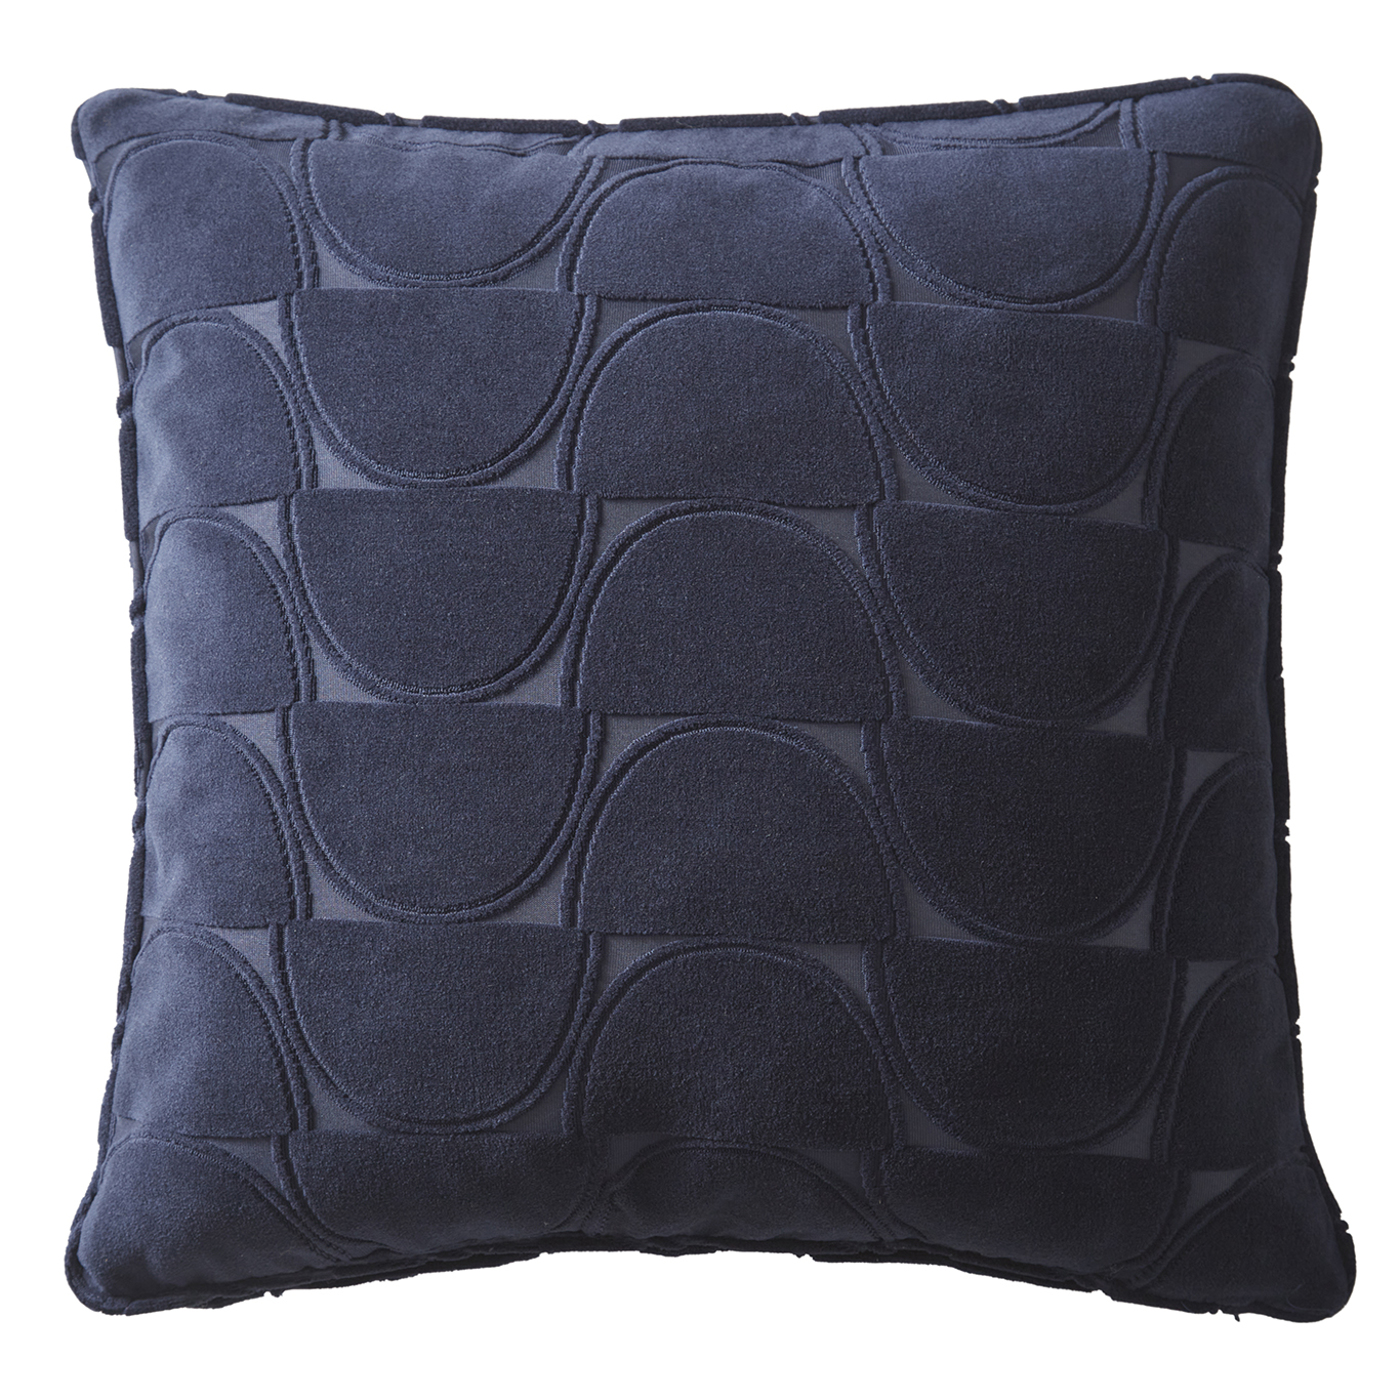 Lucca Midnight Cushions by STG